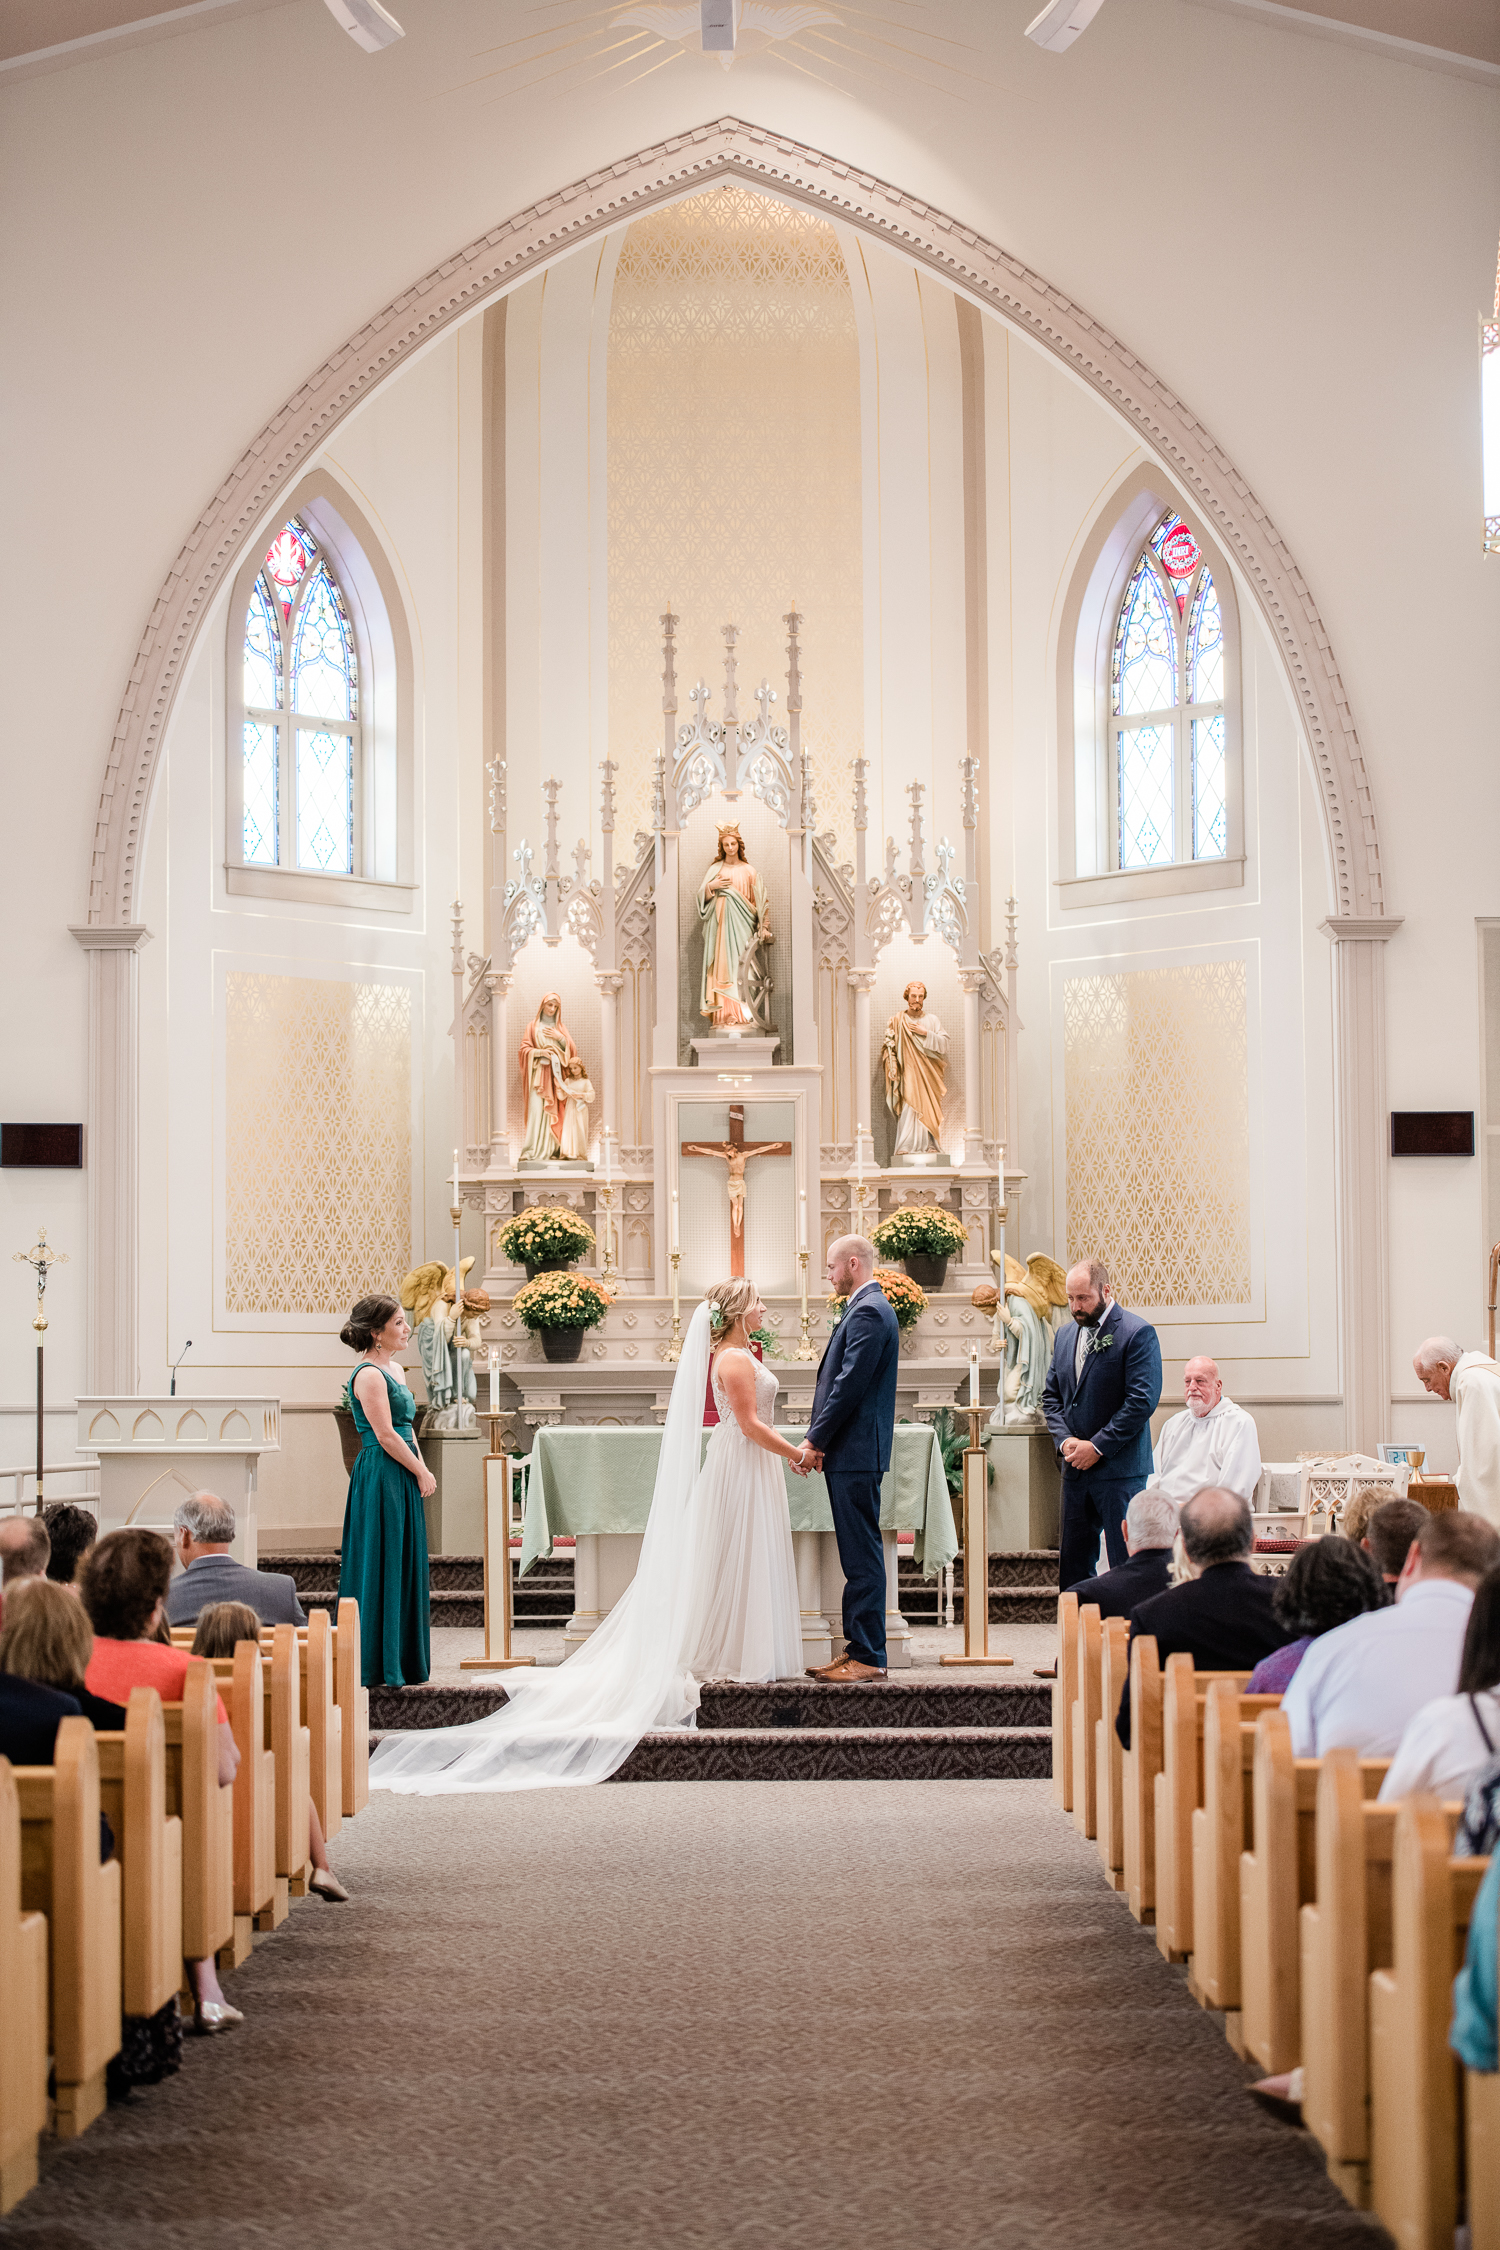 Bride and groom holds hands as they get married at the church altar